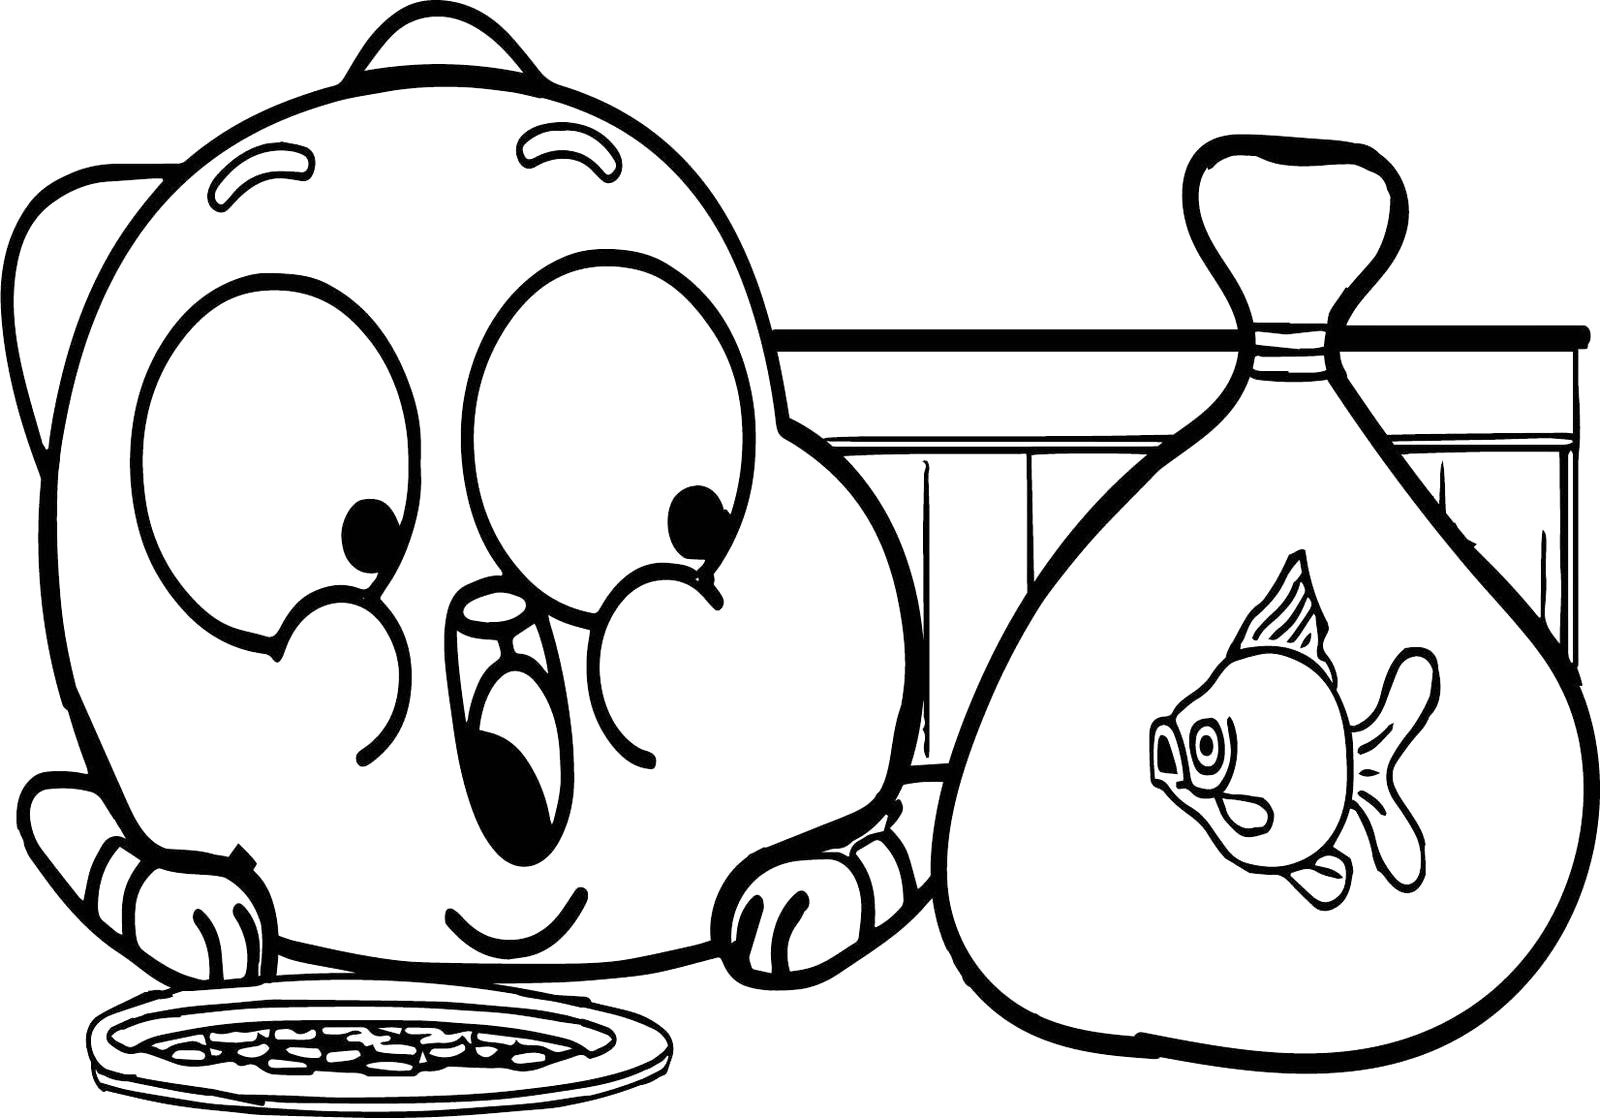 Gumball And Goldfish Coloring Page - Free Printable Coloring Pages for Kids